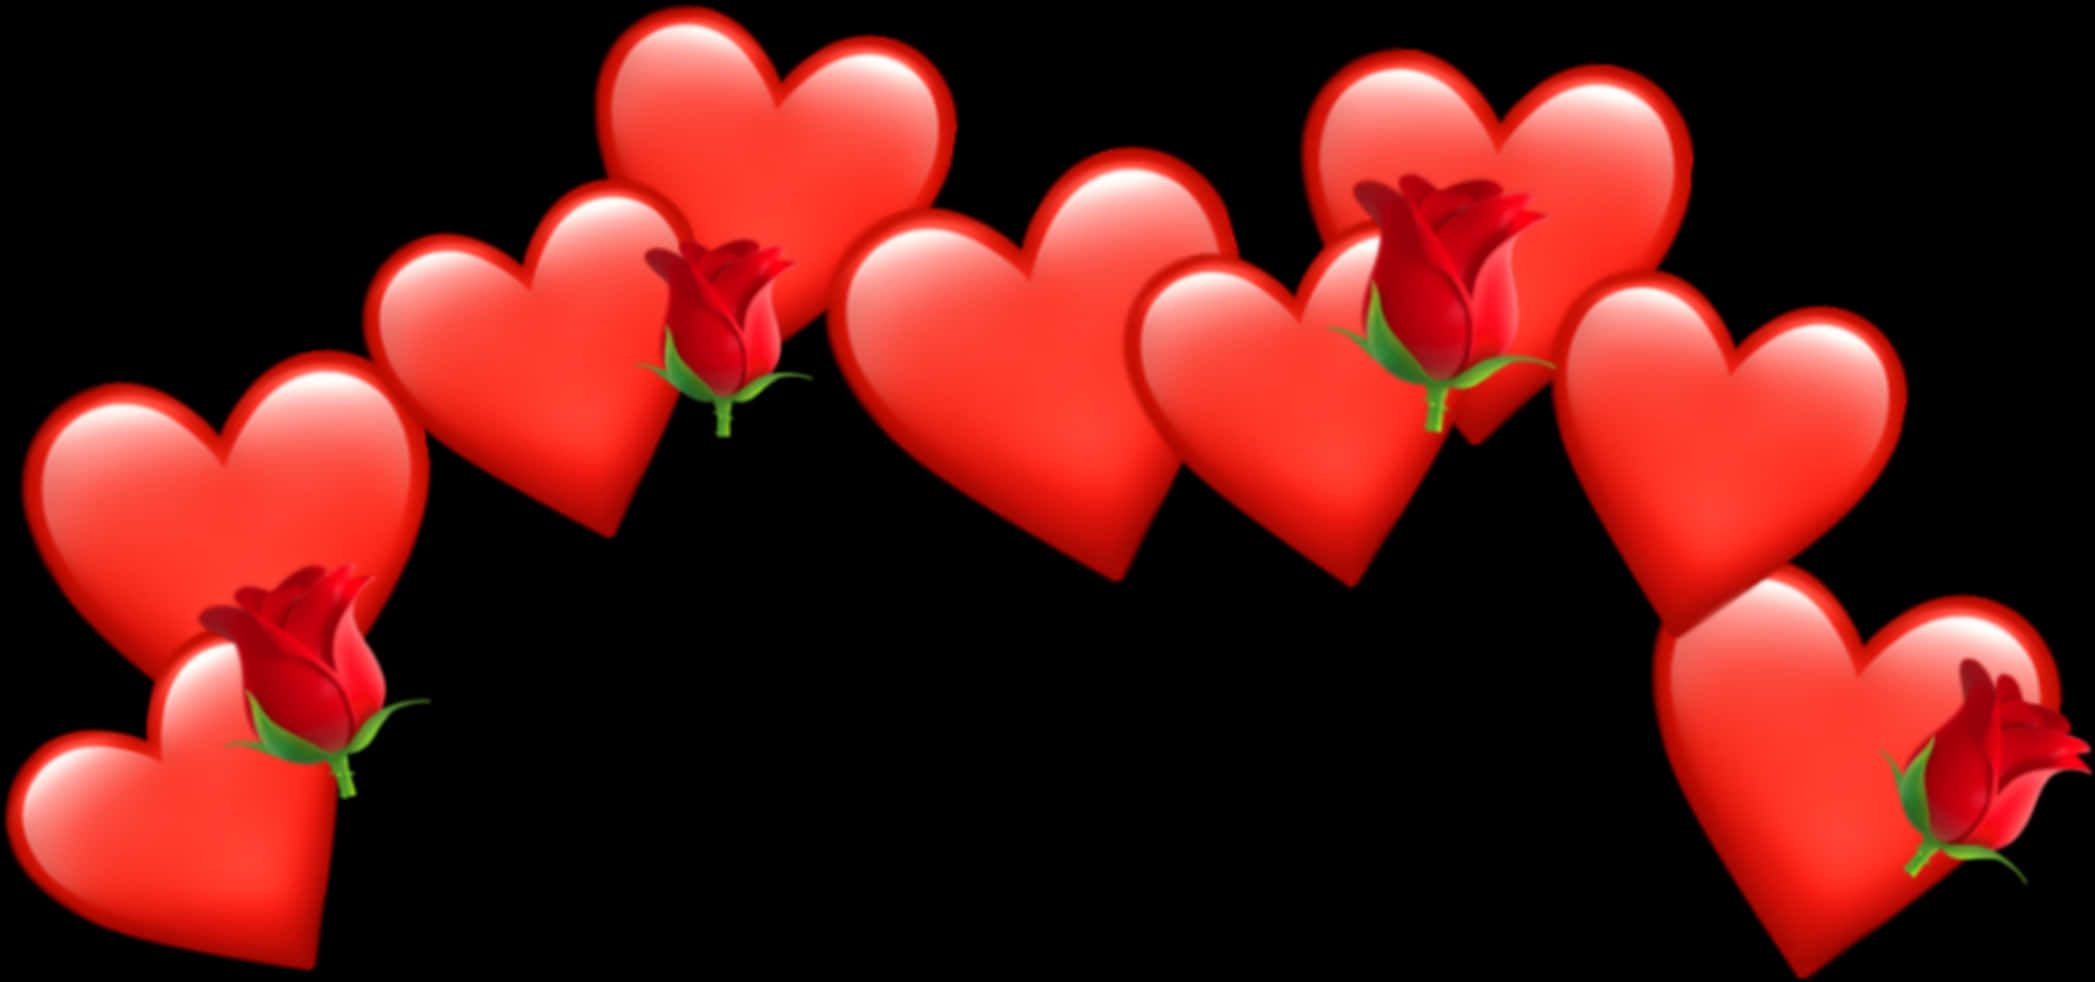 Red Heartsand Roses Embellishment PNG